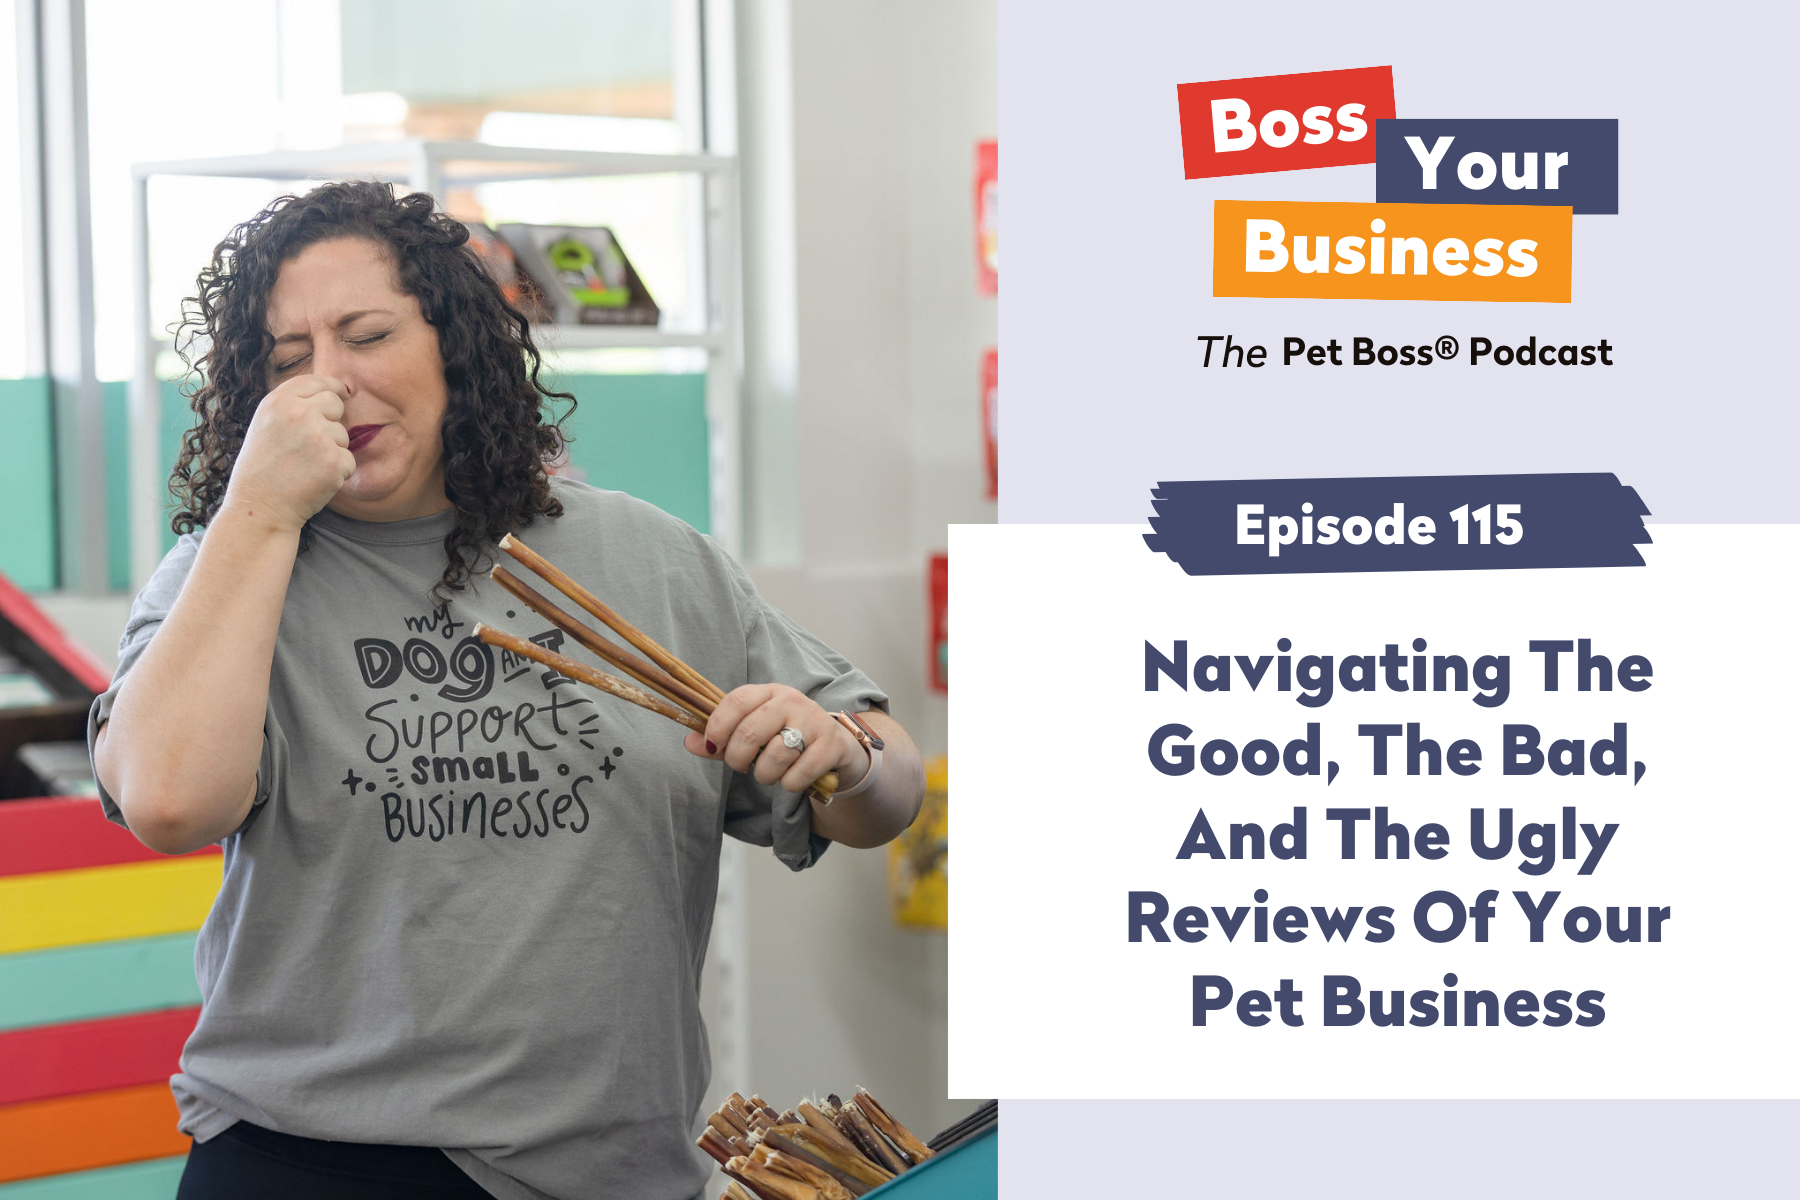 Episode 115 | Navigating The Good, The Bad, And The Ugly Reviews Of Your Pet Business